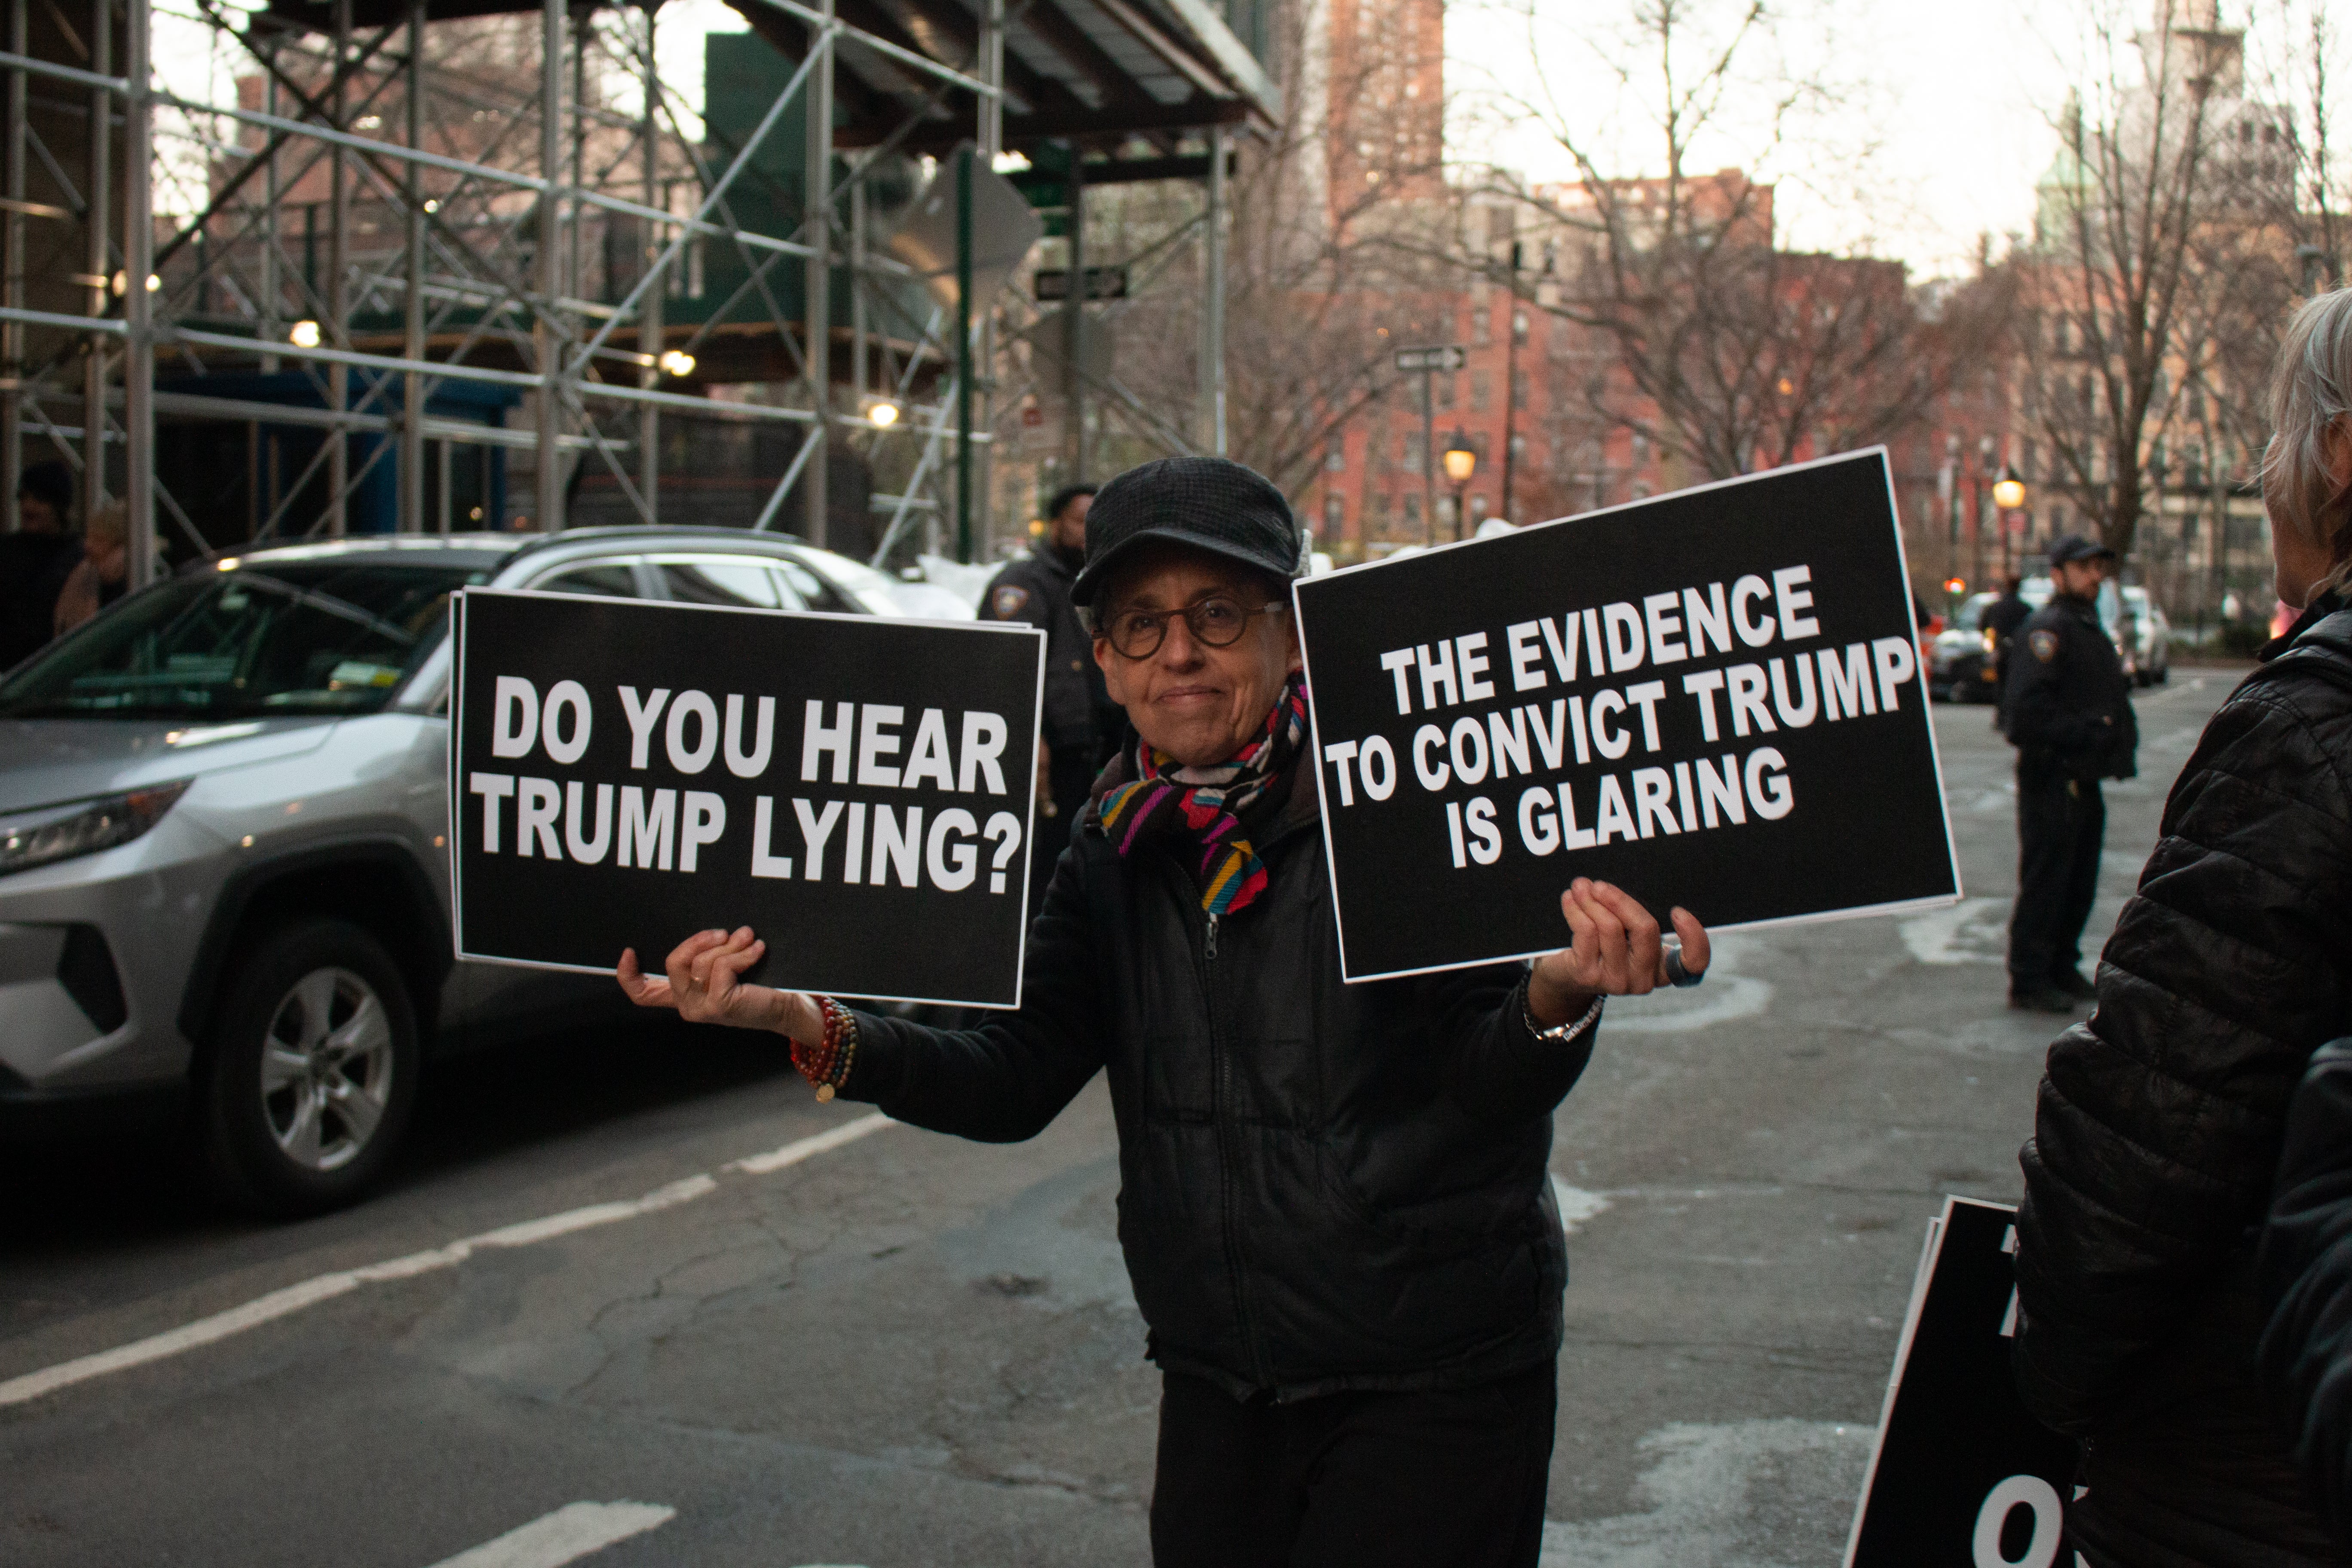 A protester holds up signs in support of the Trump indictment